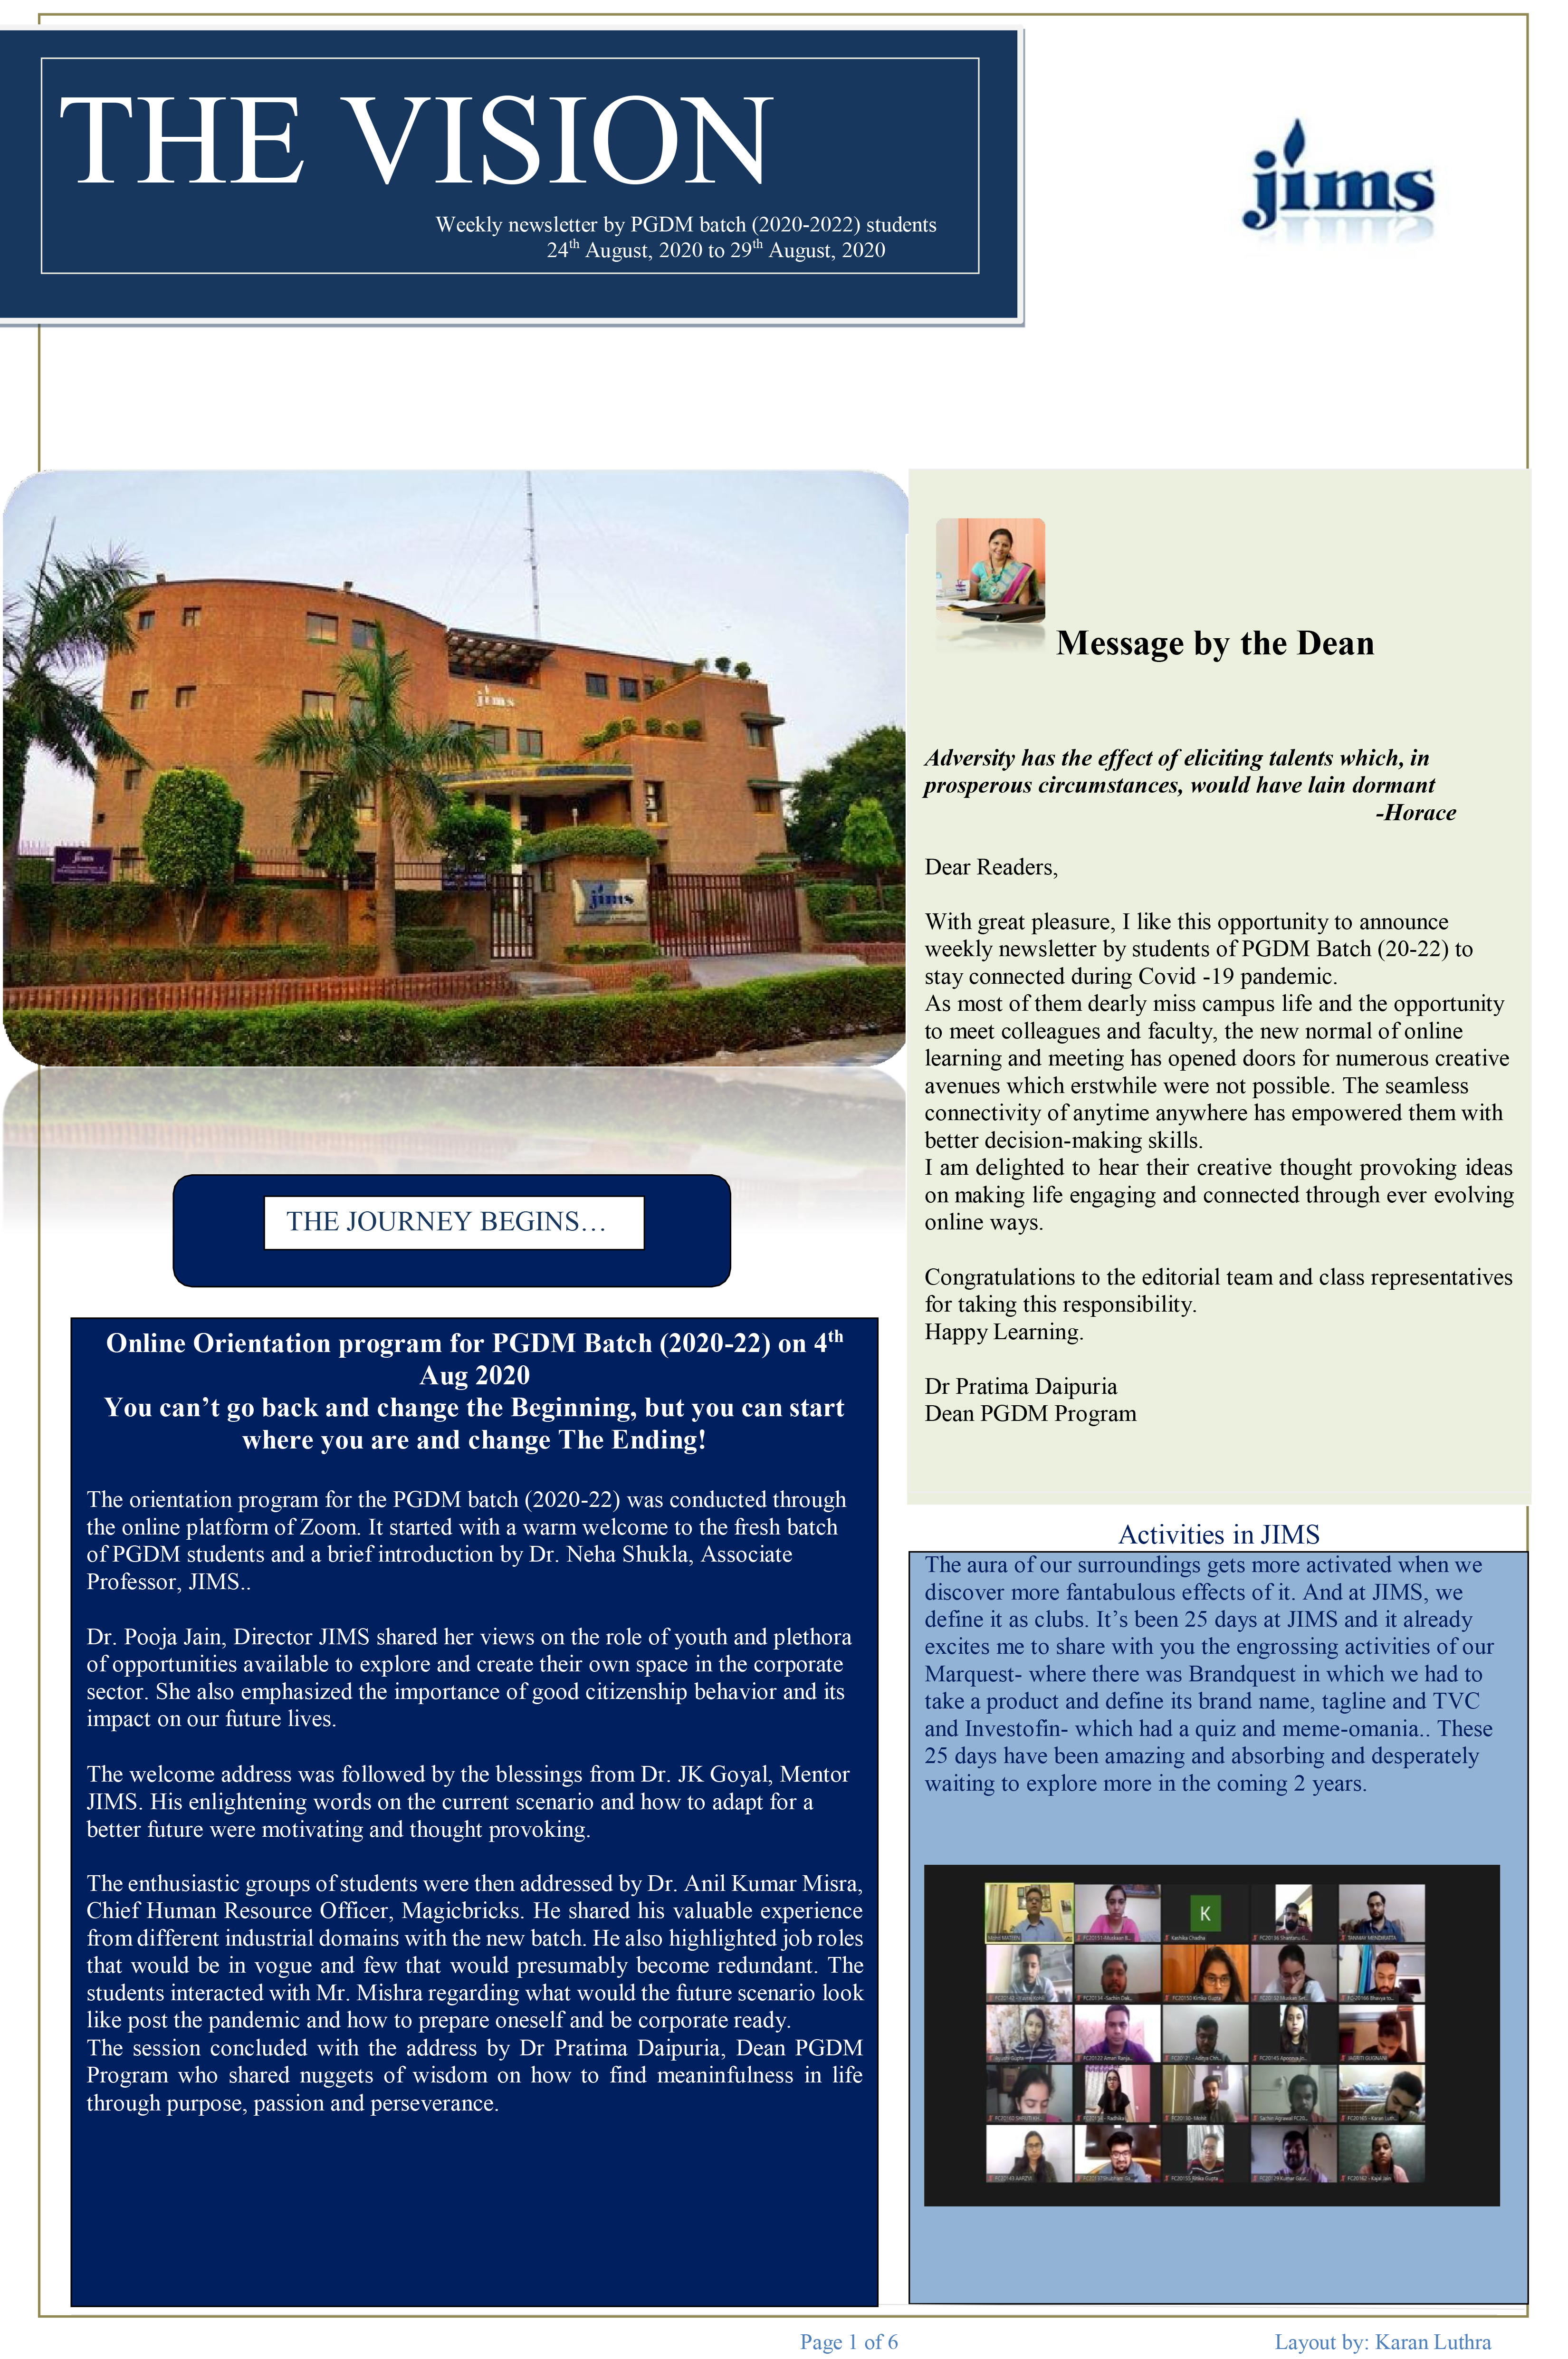 THE VISION Weekly Newsletter by PGDM batch (2020-2022) Students, 24th August, 2020 to 29th August, 2020